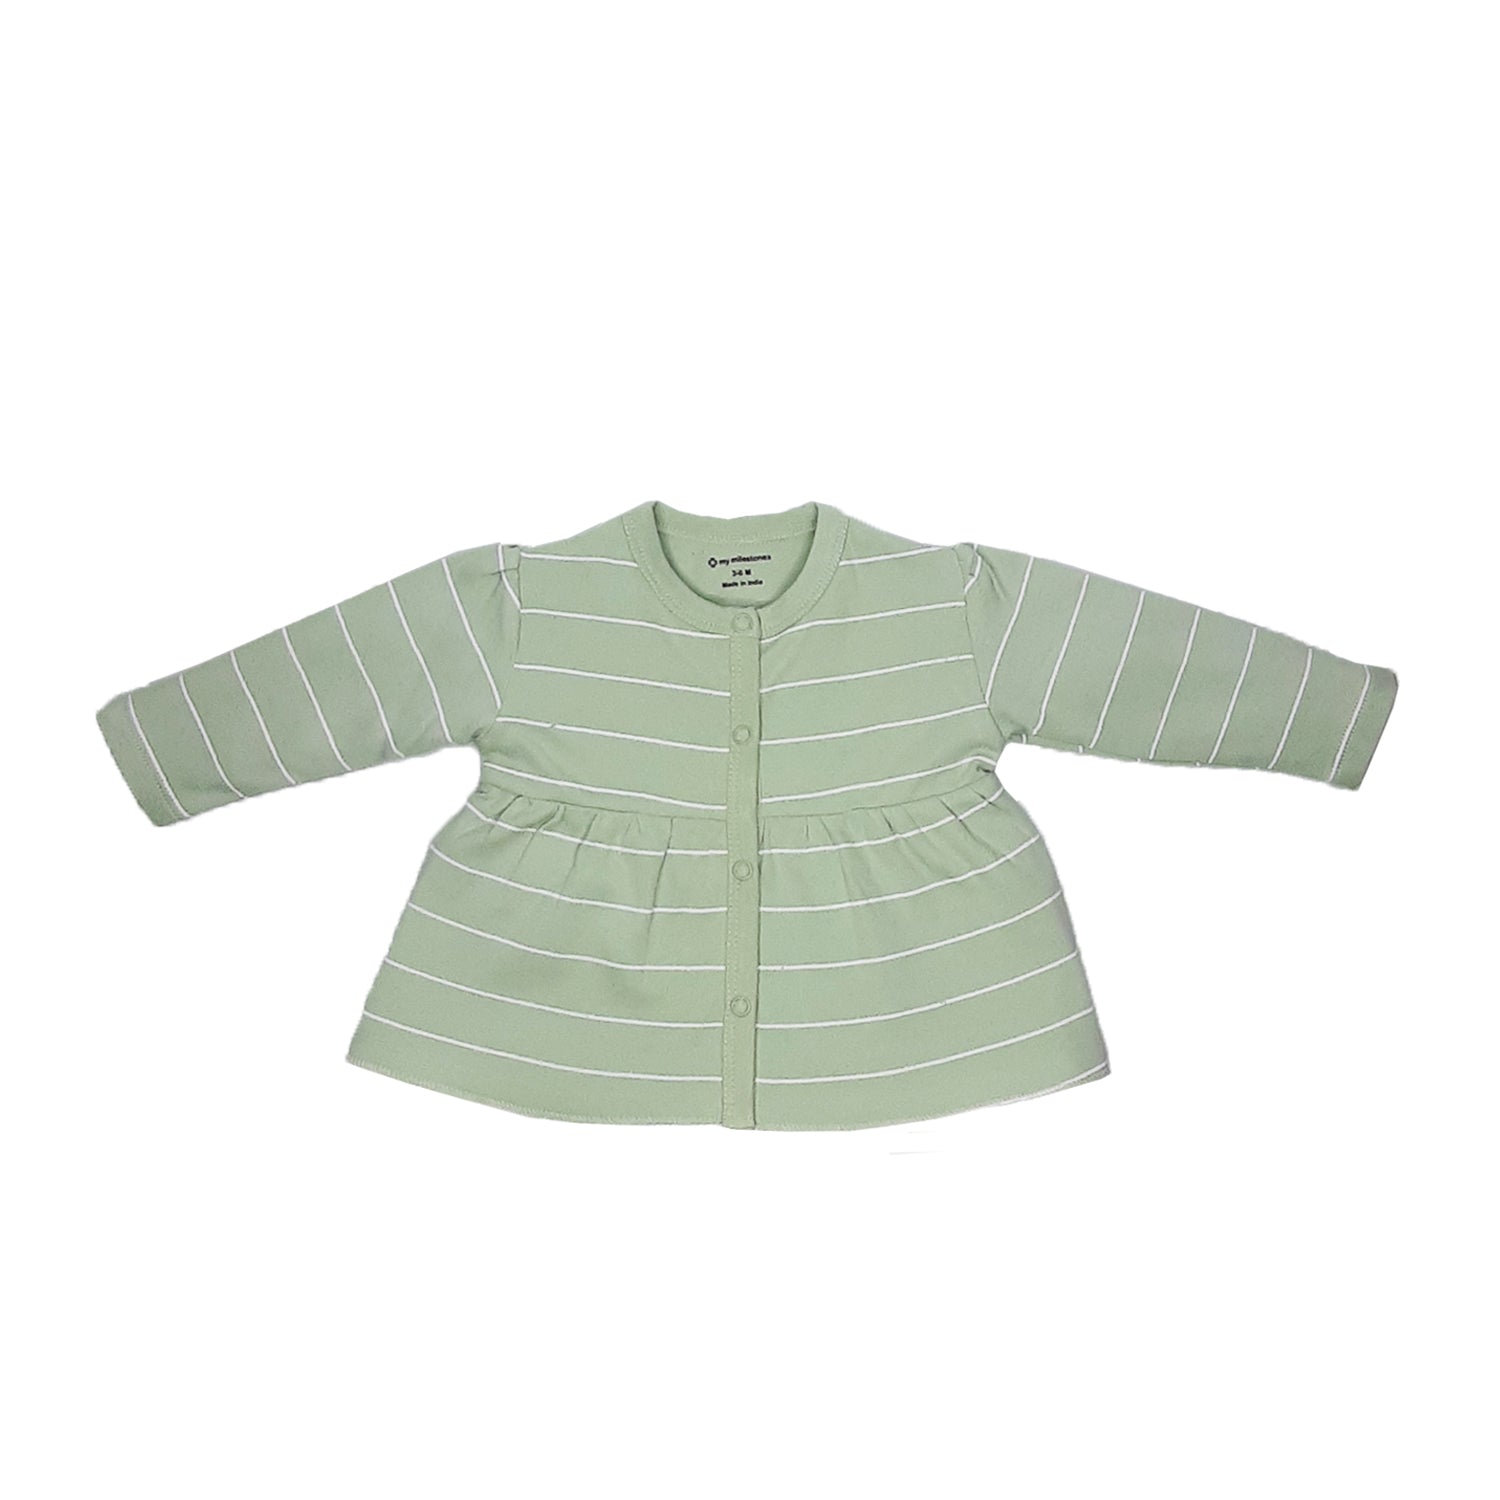 My Milestones T-shirt Full Sleeves Grey Striped / Sage Green Striped - 2 Pc Pack